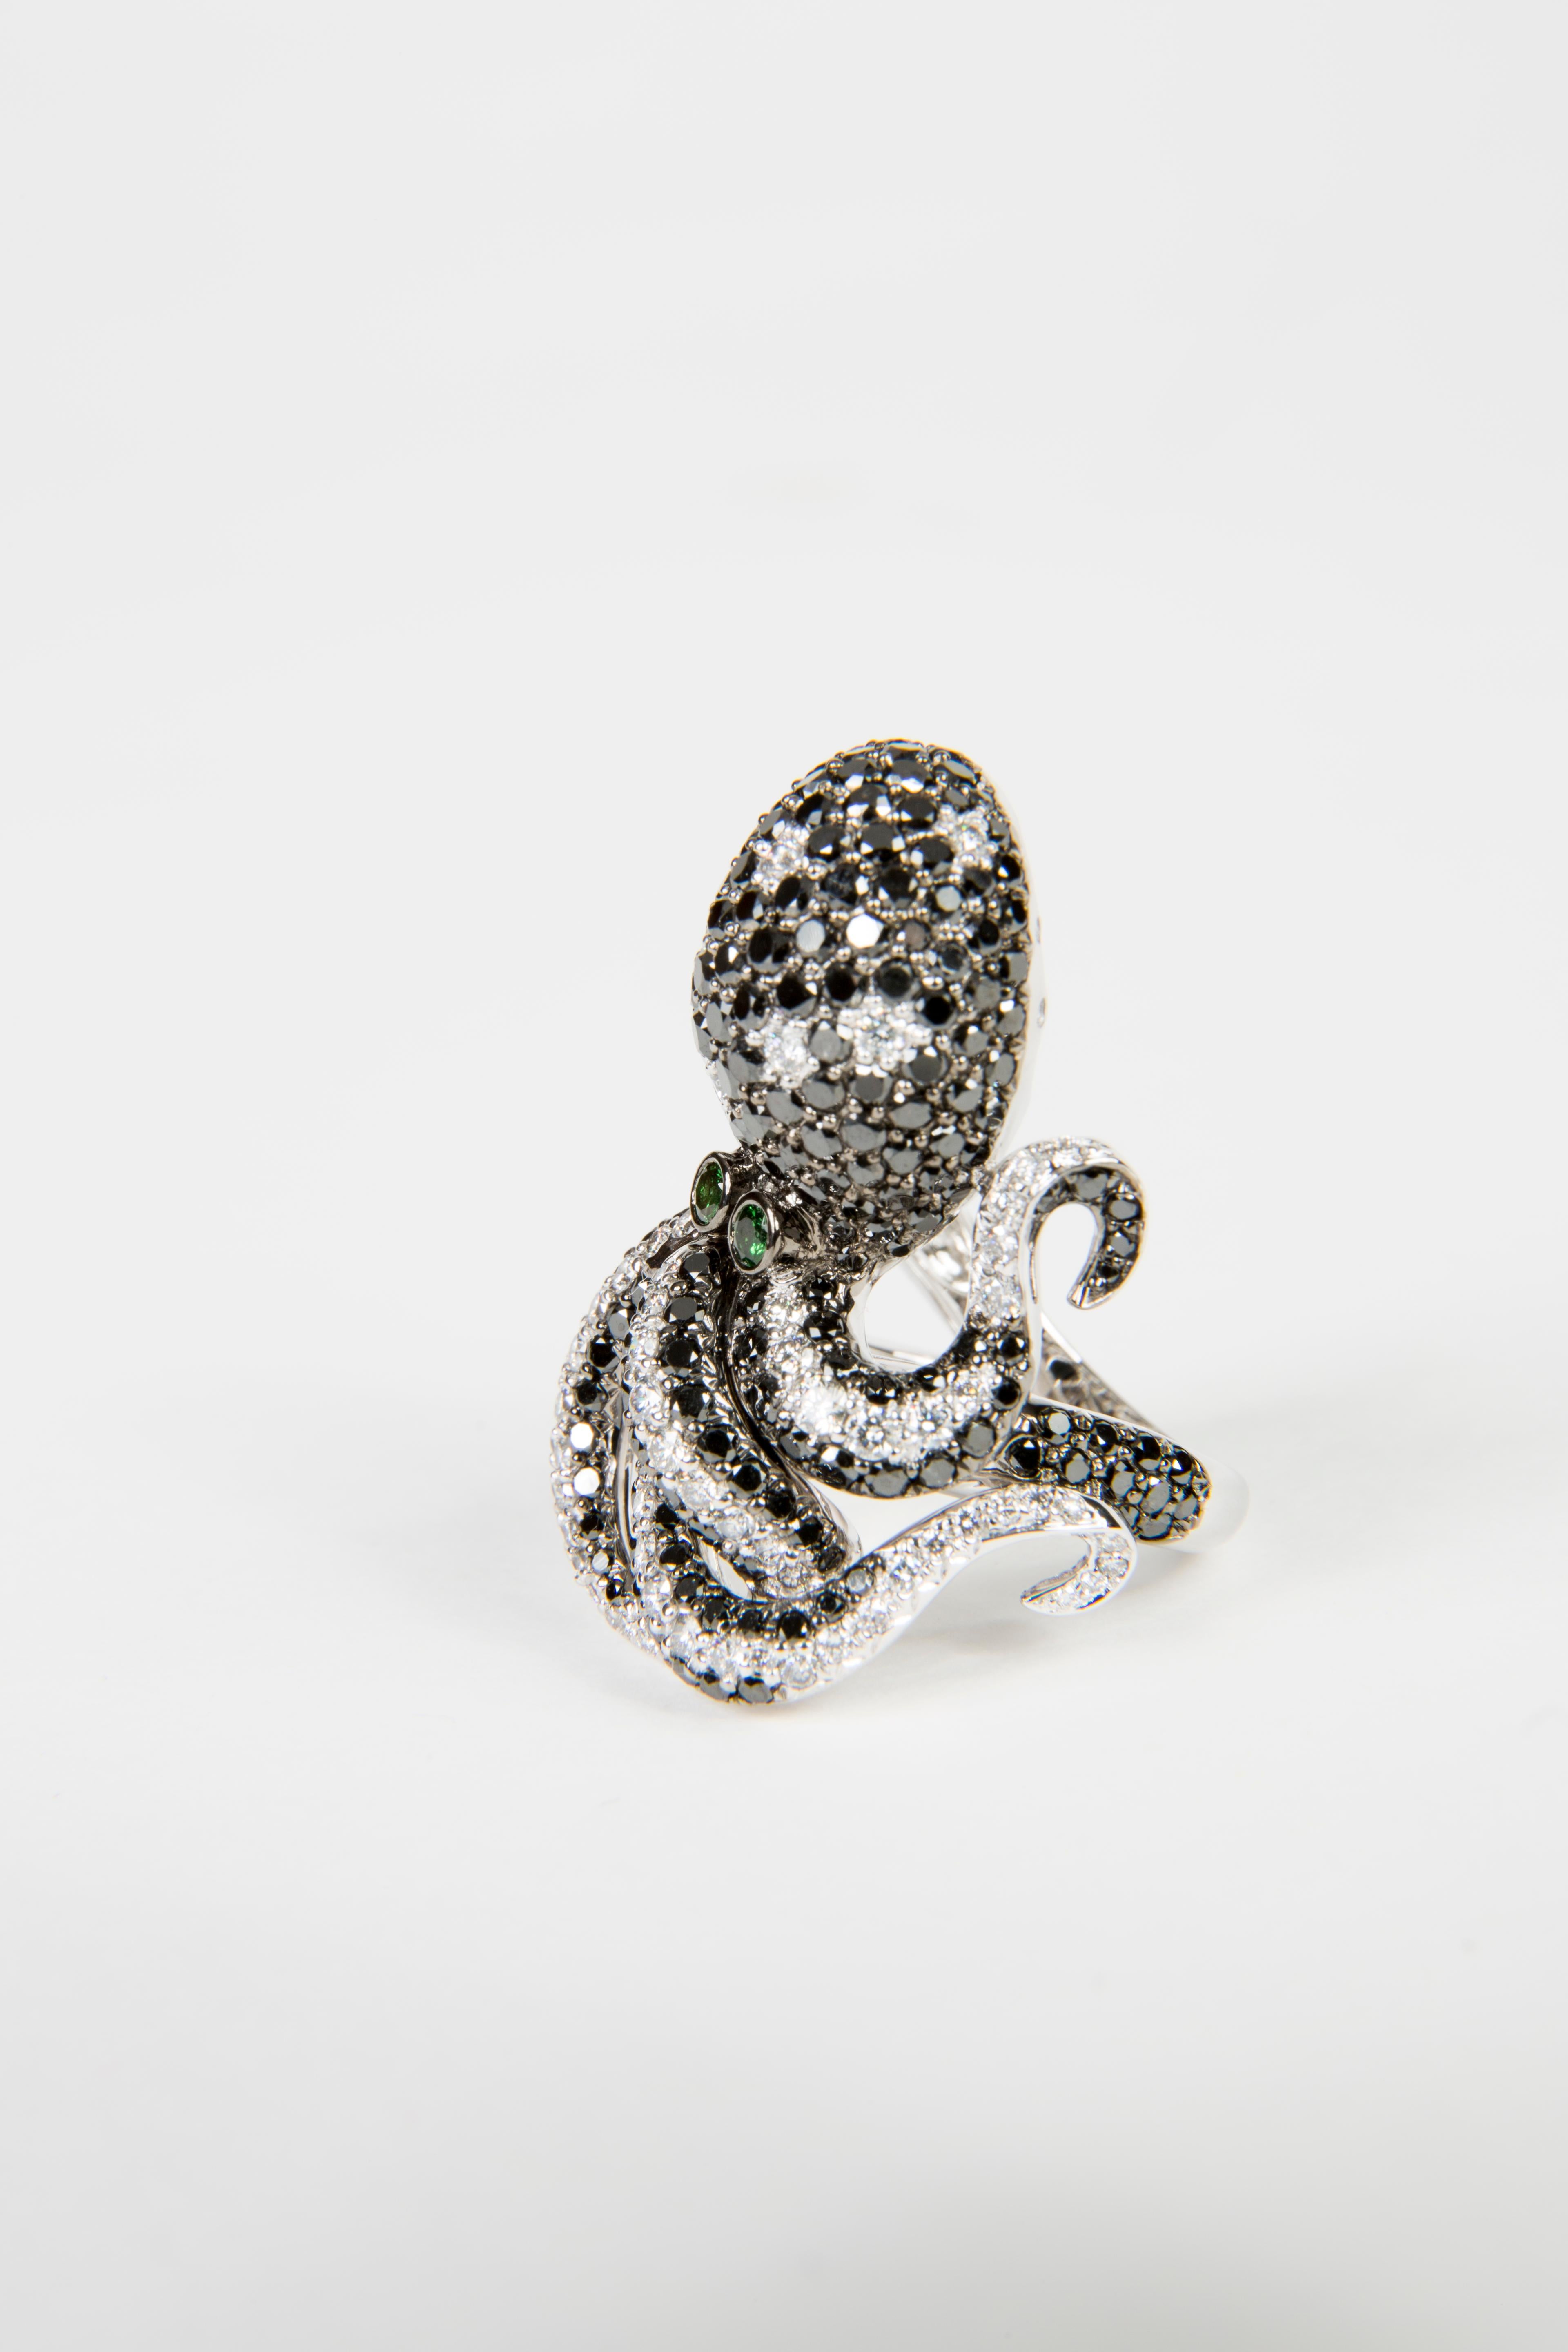 Cocktail Ring in Octopus Shape
1,21 ct white diamonds 
4,42 ct black diamonds
eyes made of tsavorites
18k white gold 
ring size 53 (can be changed one size up or down)